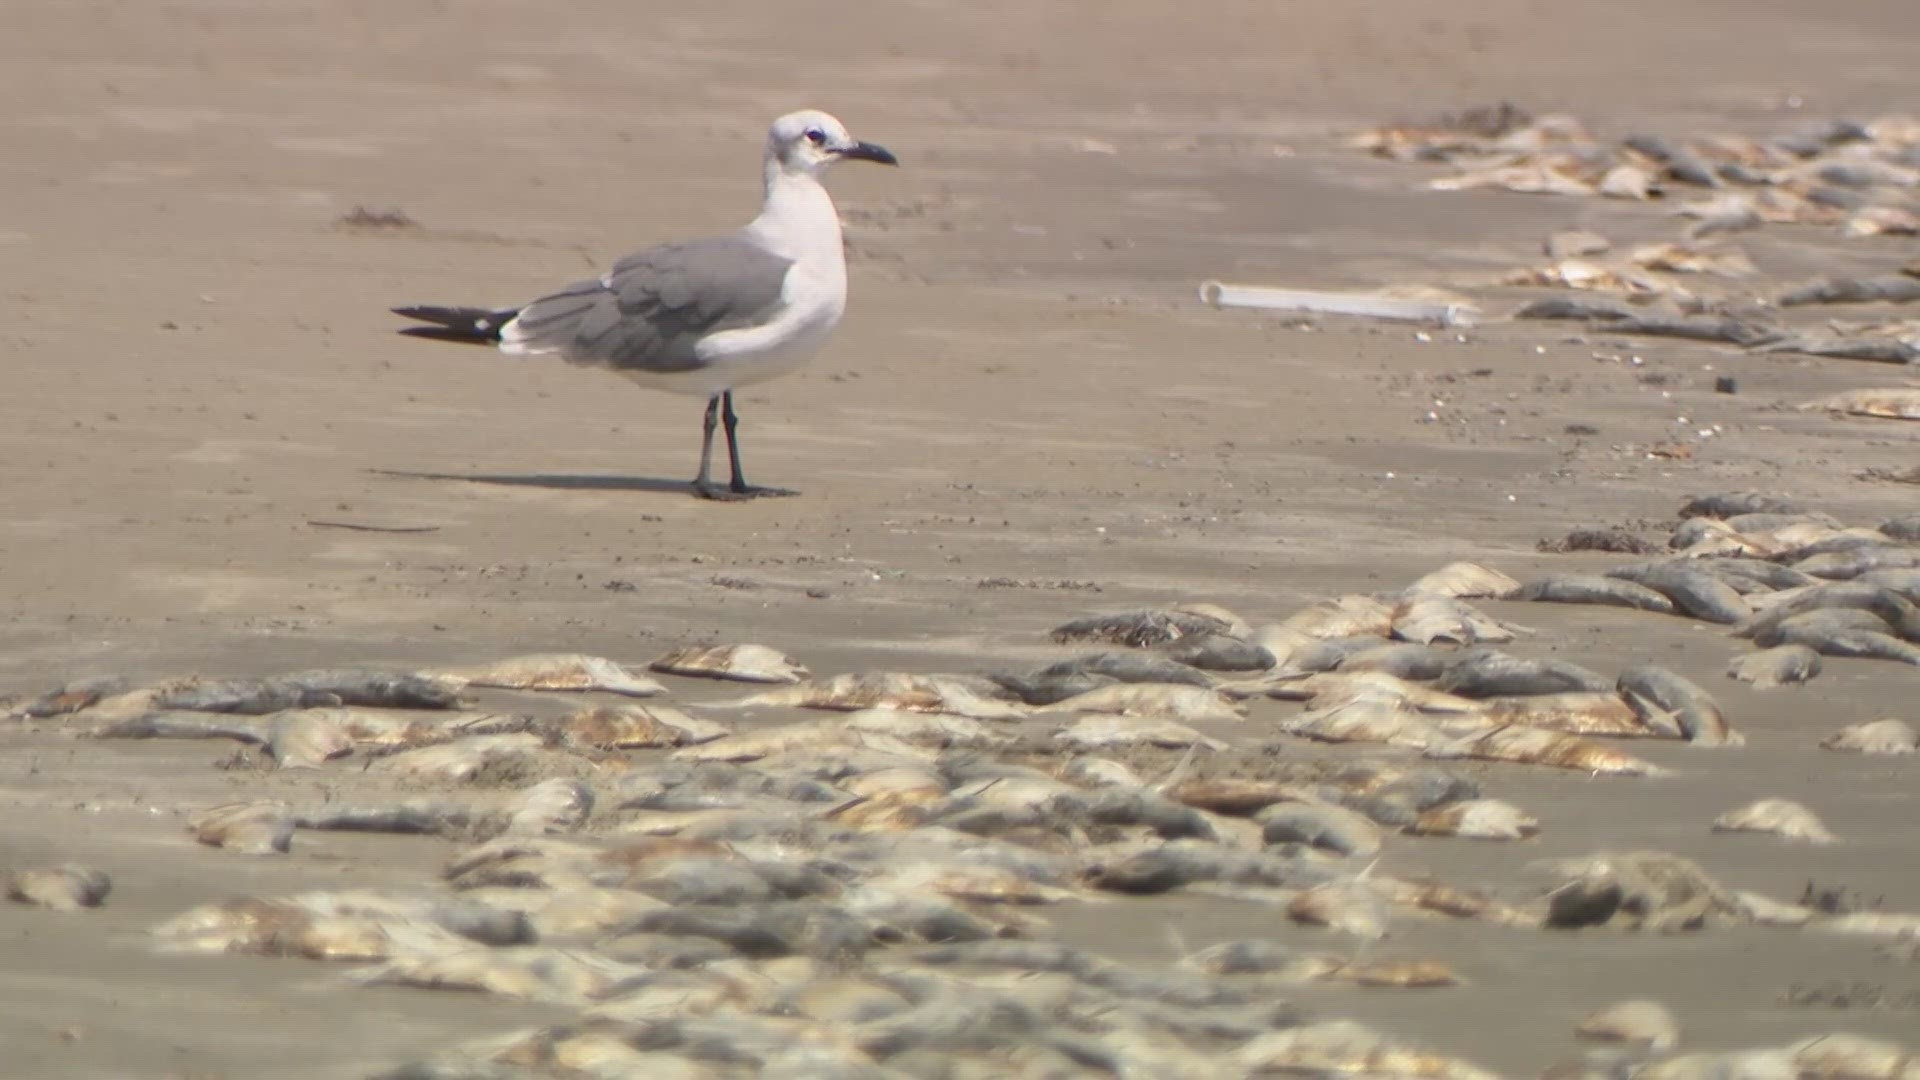 A video from the West End of the island showed dead fish littered across the sand for as far as the eye could see.